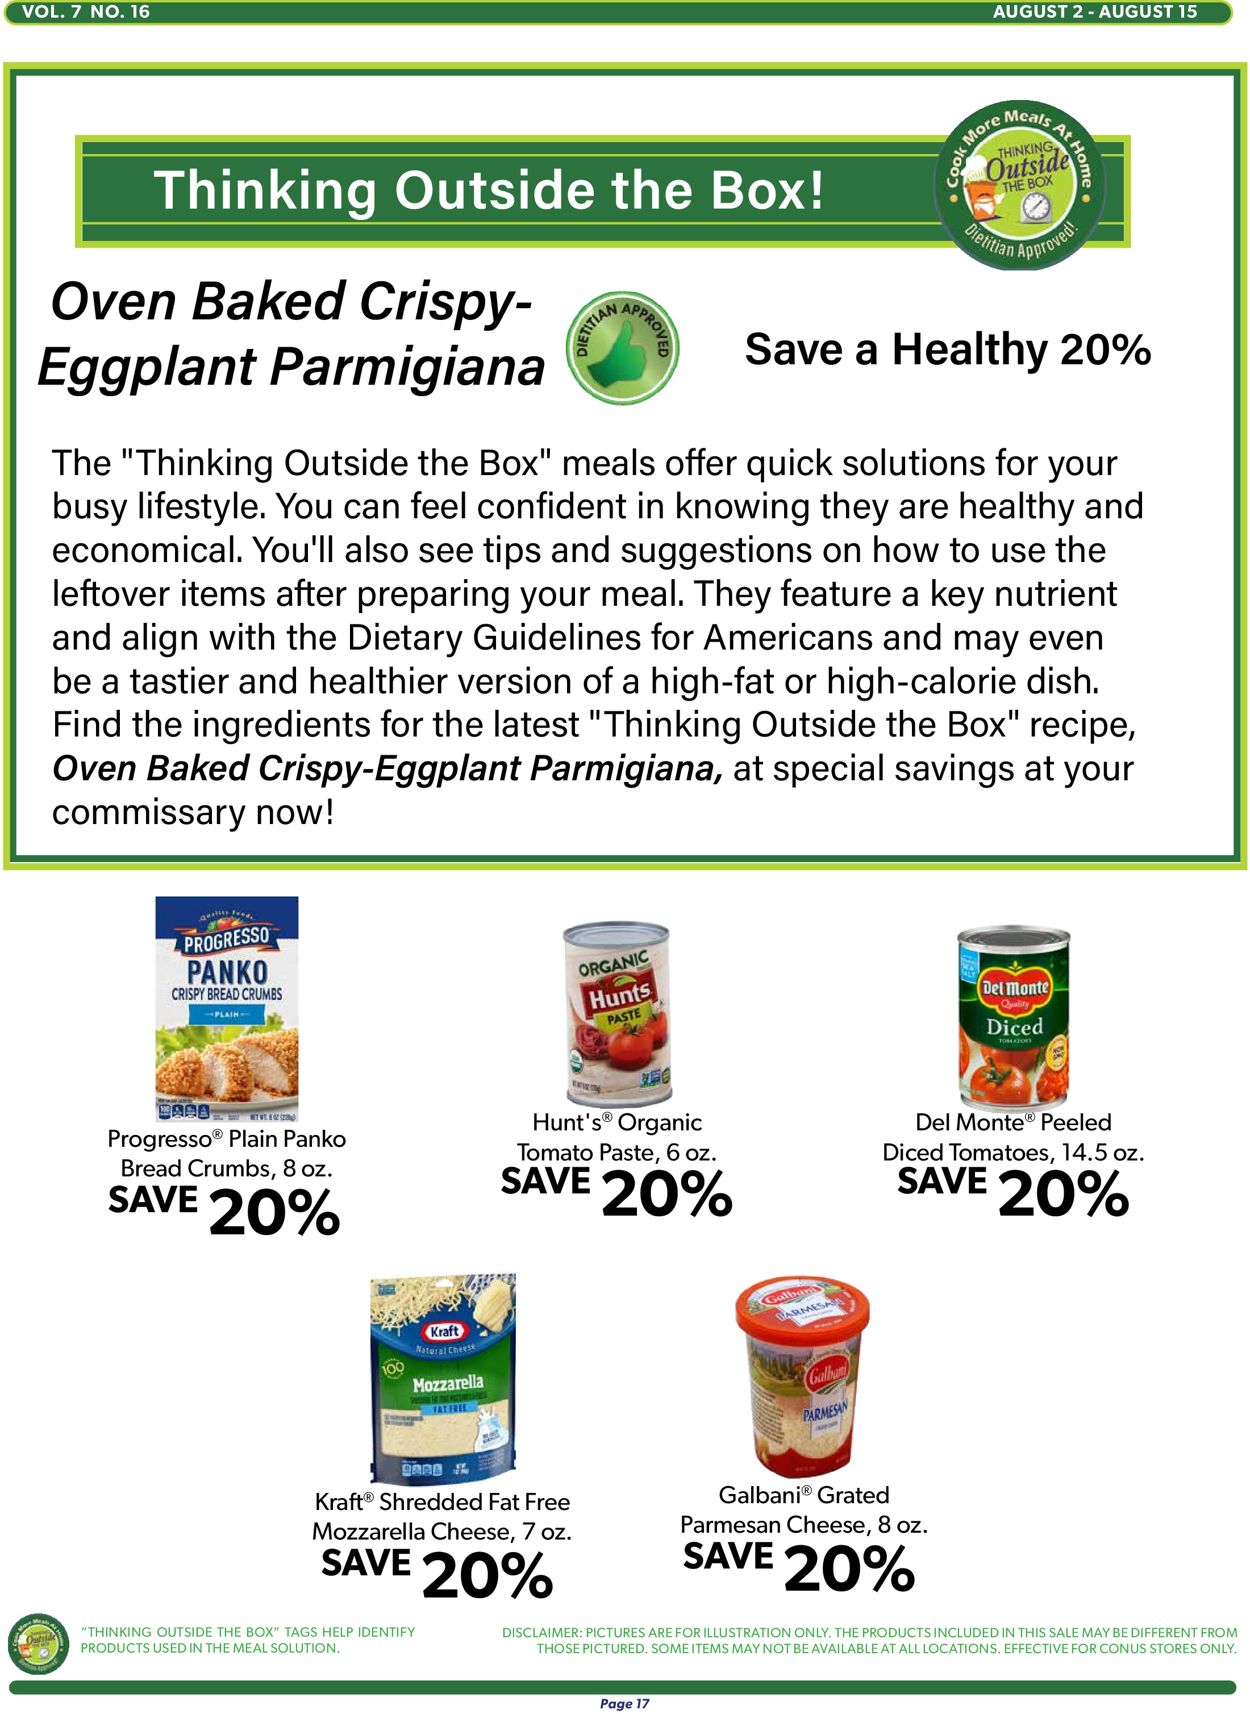 Commissary Ad from 08/02/2021